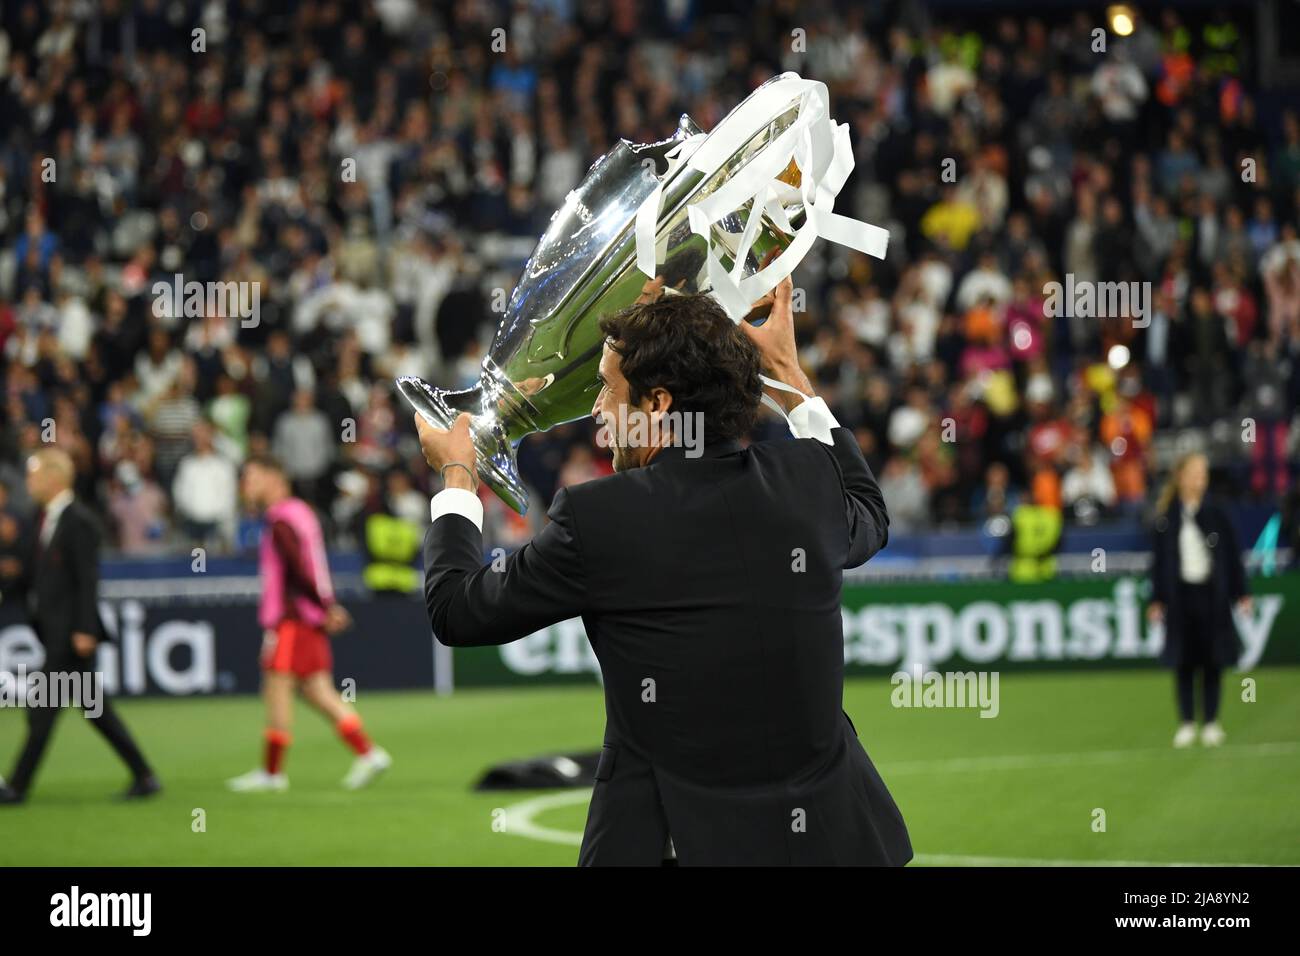 Paris, France. 28th May, 2022. Raul Gonzalez Blanco during the Uefa Champions League match between Liverpool 0-1 Real Madrid at Stade de France on May 28, 2022 in Paris, France. Credit: Maurizio Borsari/AFLO/Alamy Live News Credit: Aflo Co. Ltd./Alamy Live News Stock Photo